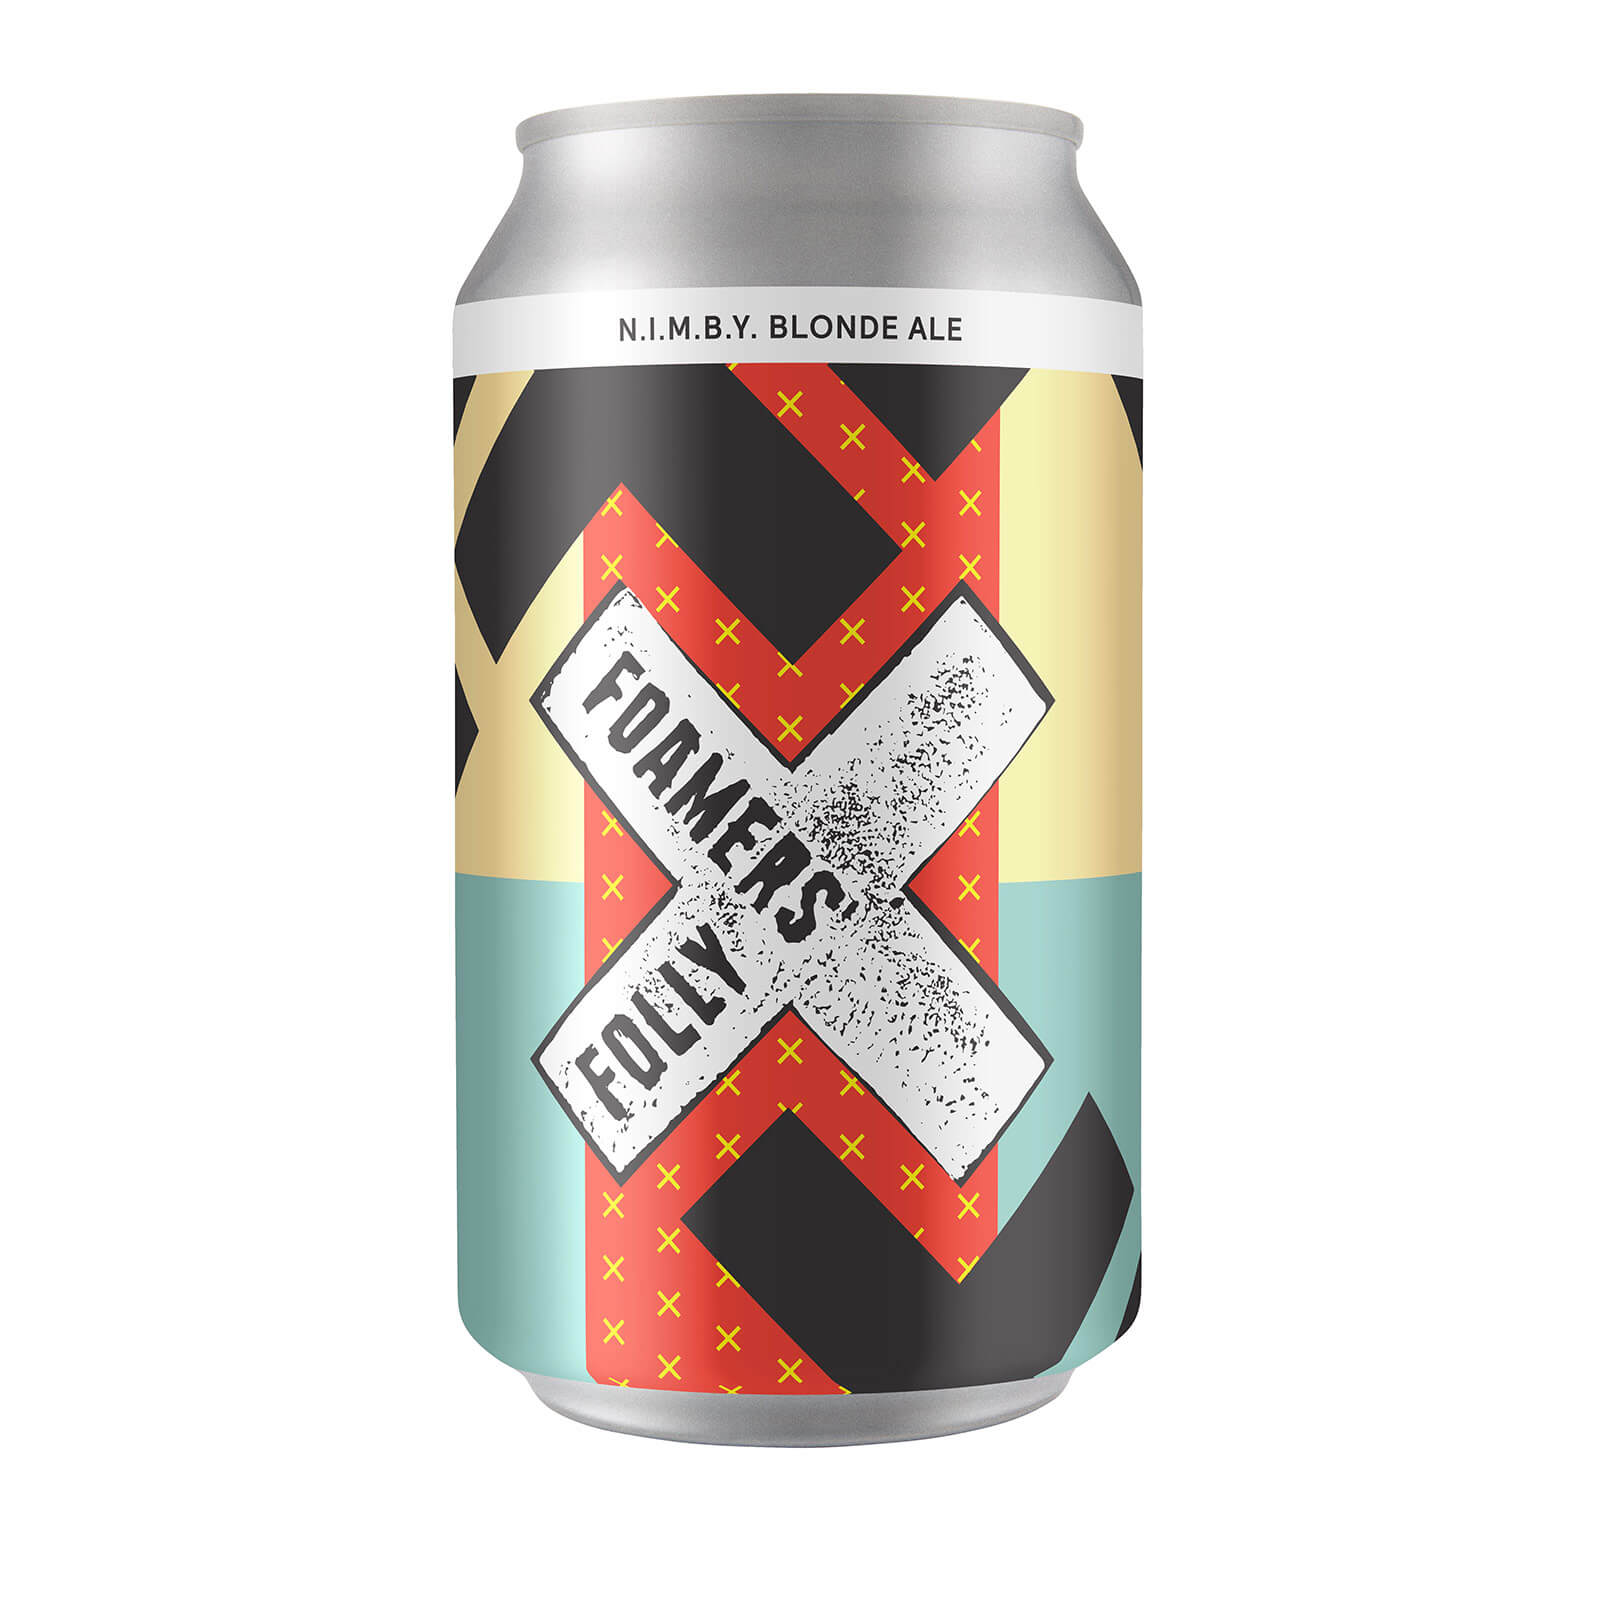 Foamers' Folly Brewing Co. NIMBY Blonde Ale can design